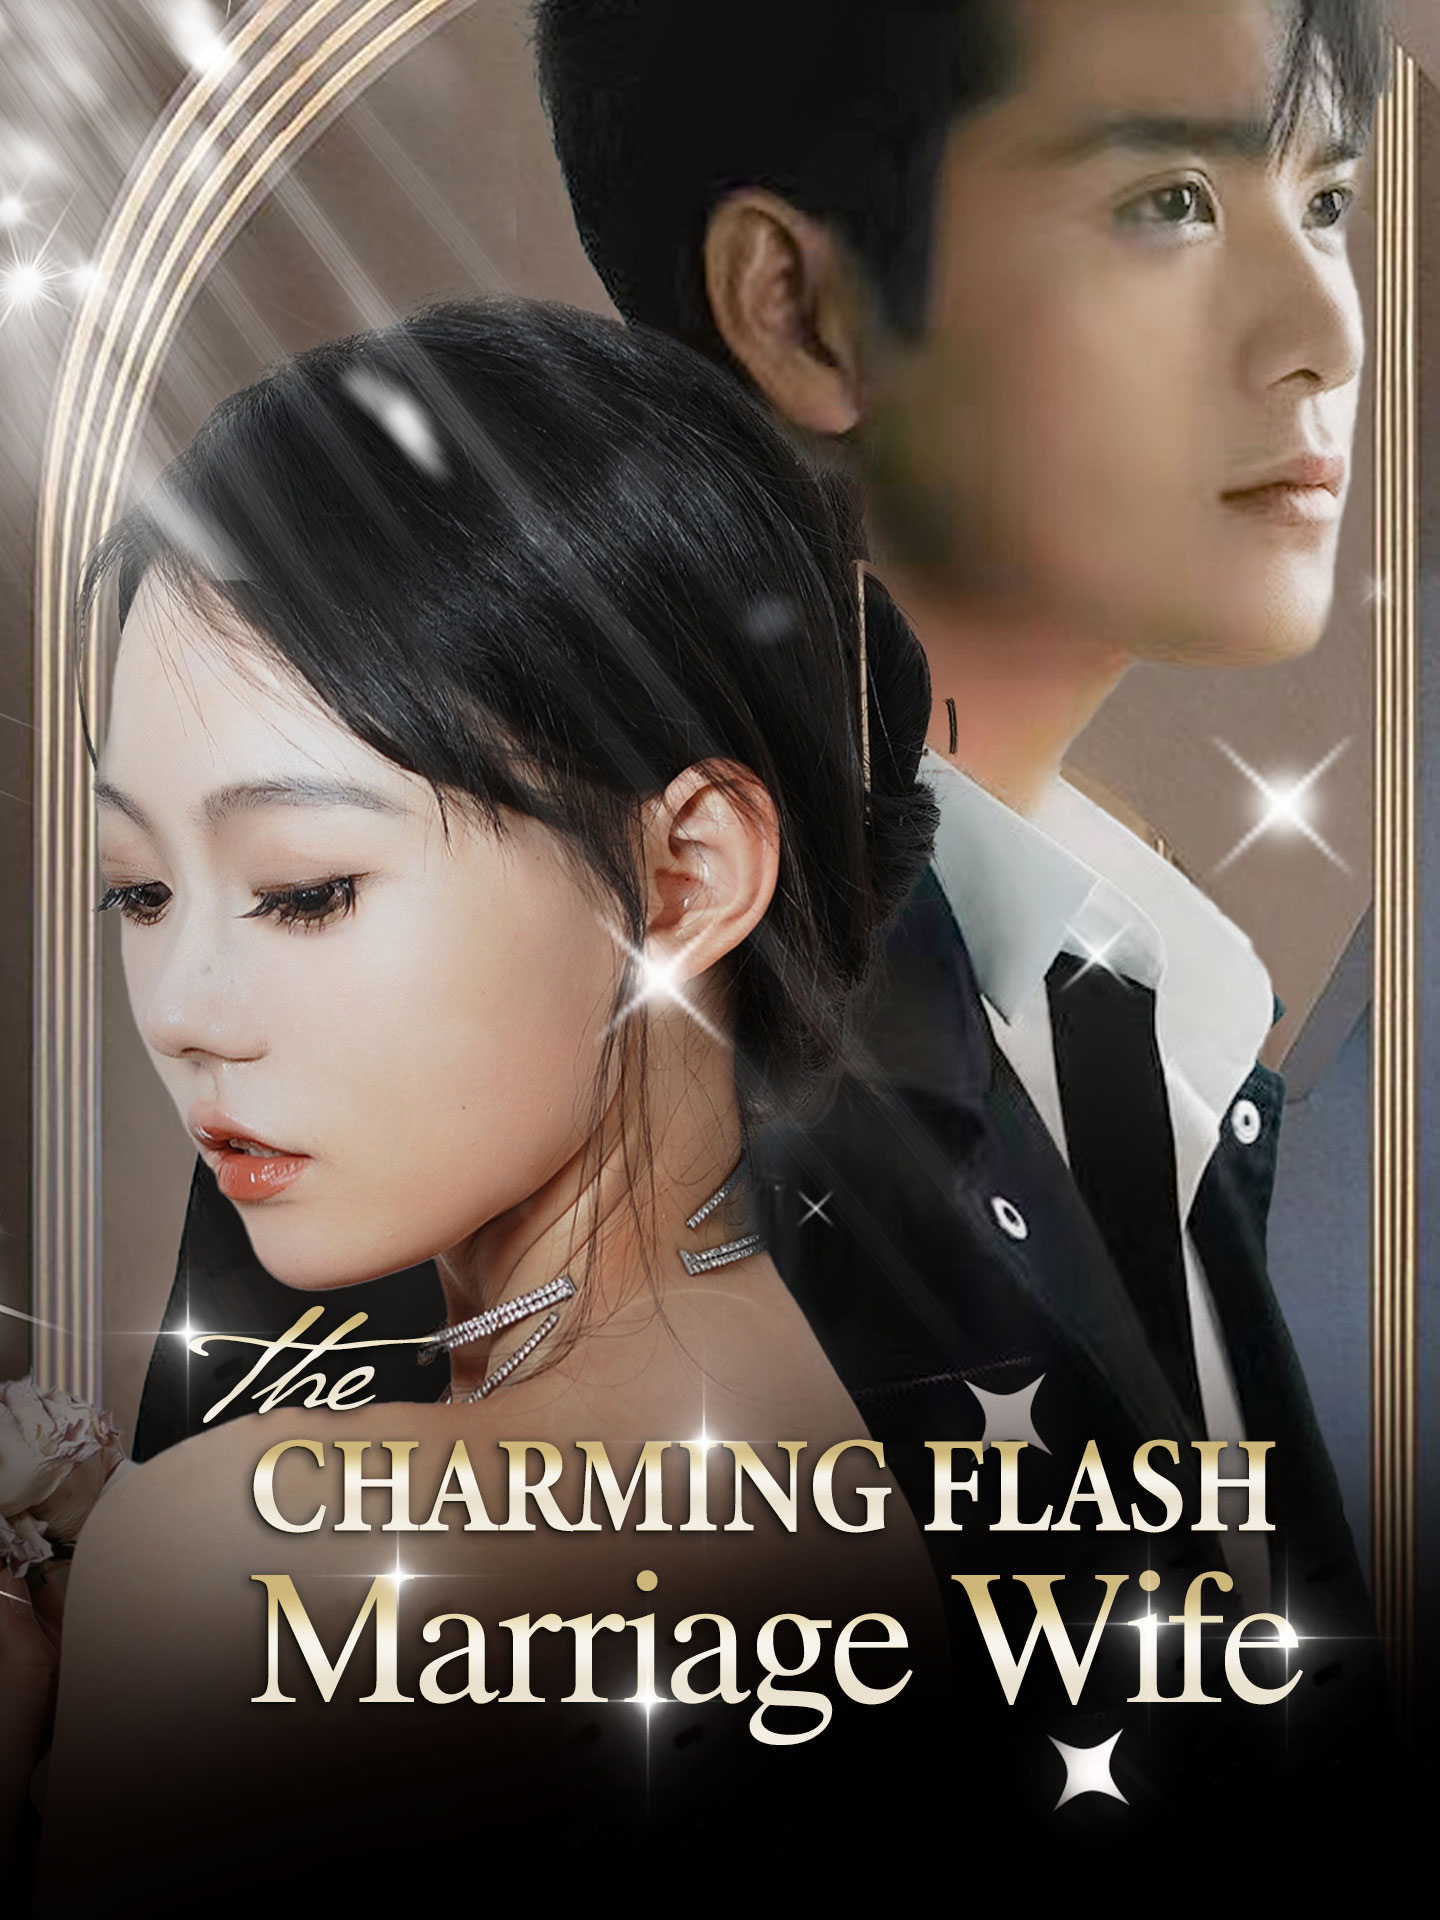 The Charming Flash Marriage Wife